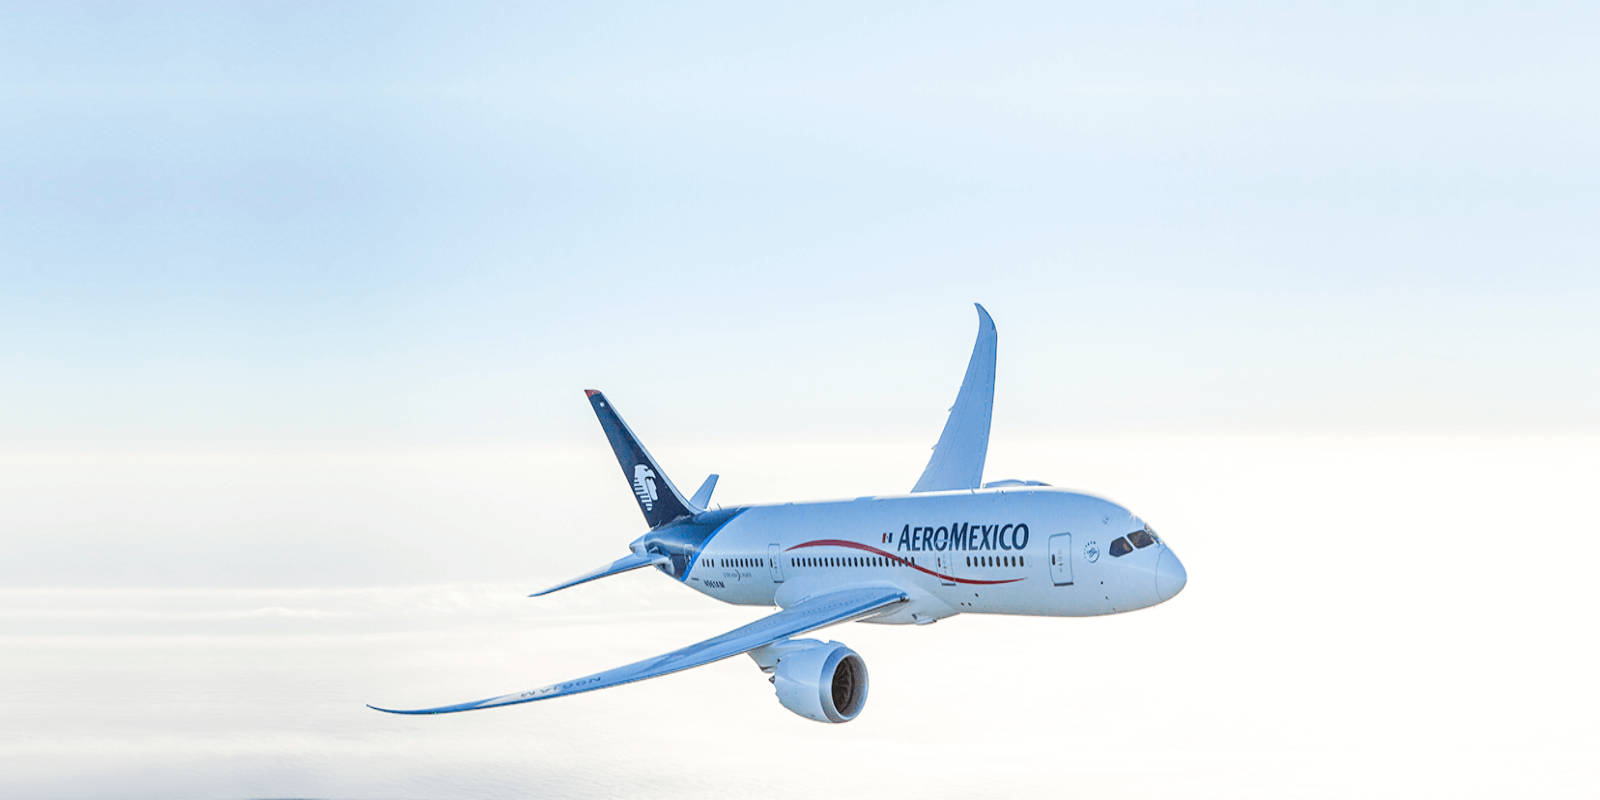 Aeromexico Airline Plane Flying In Clear Sky Wallpaper